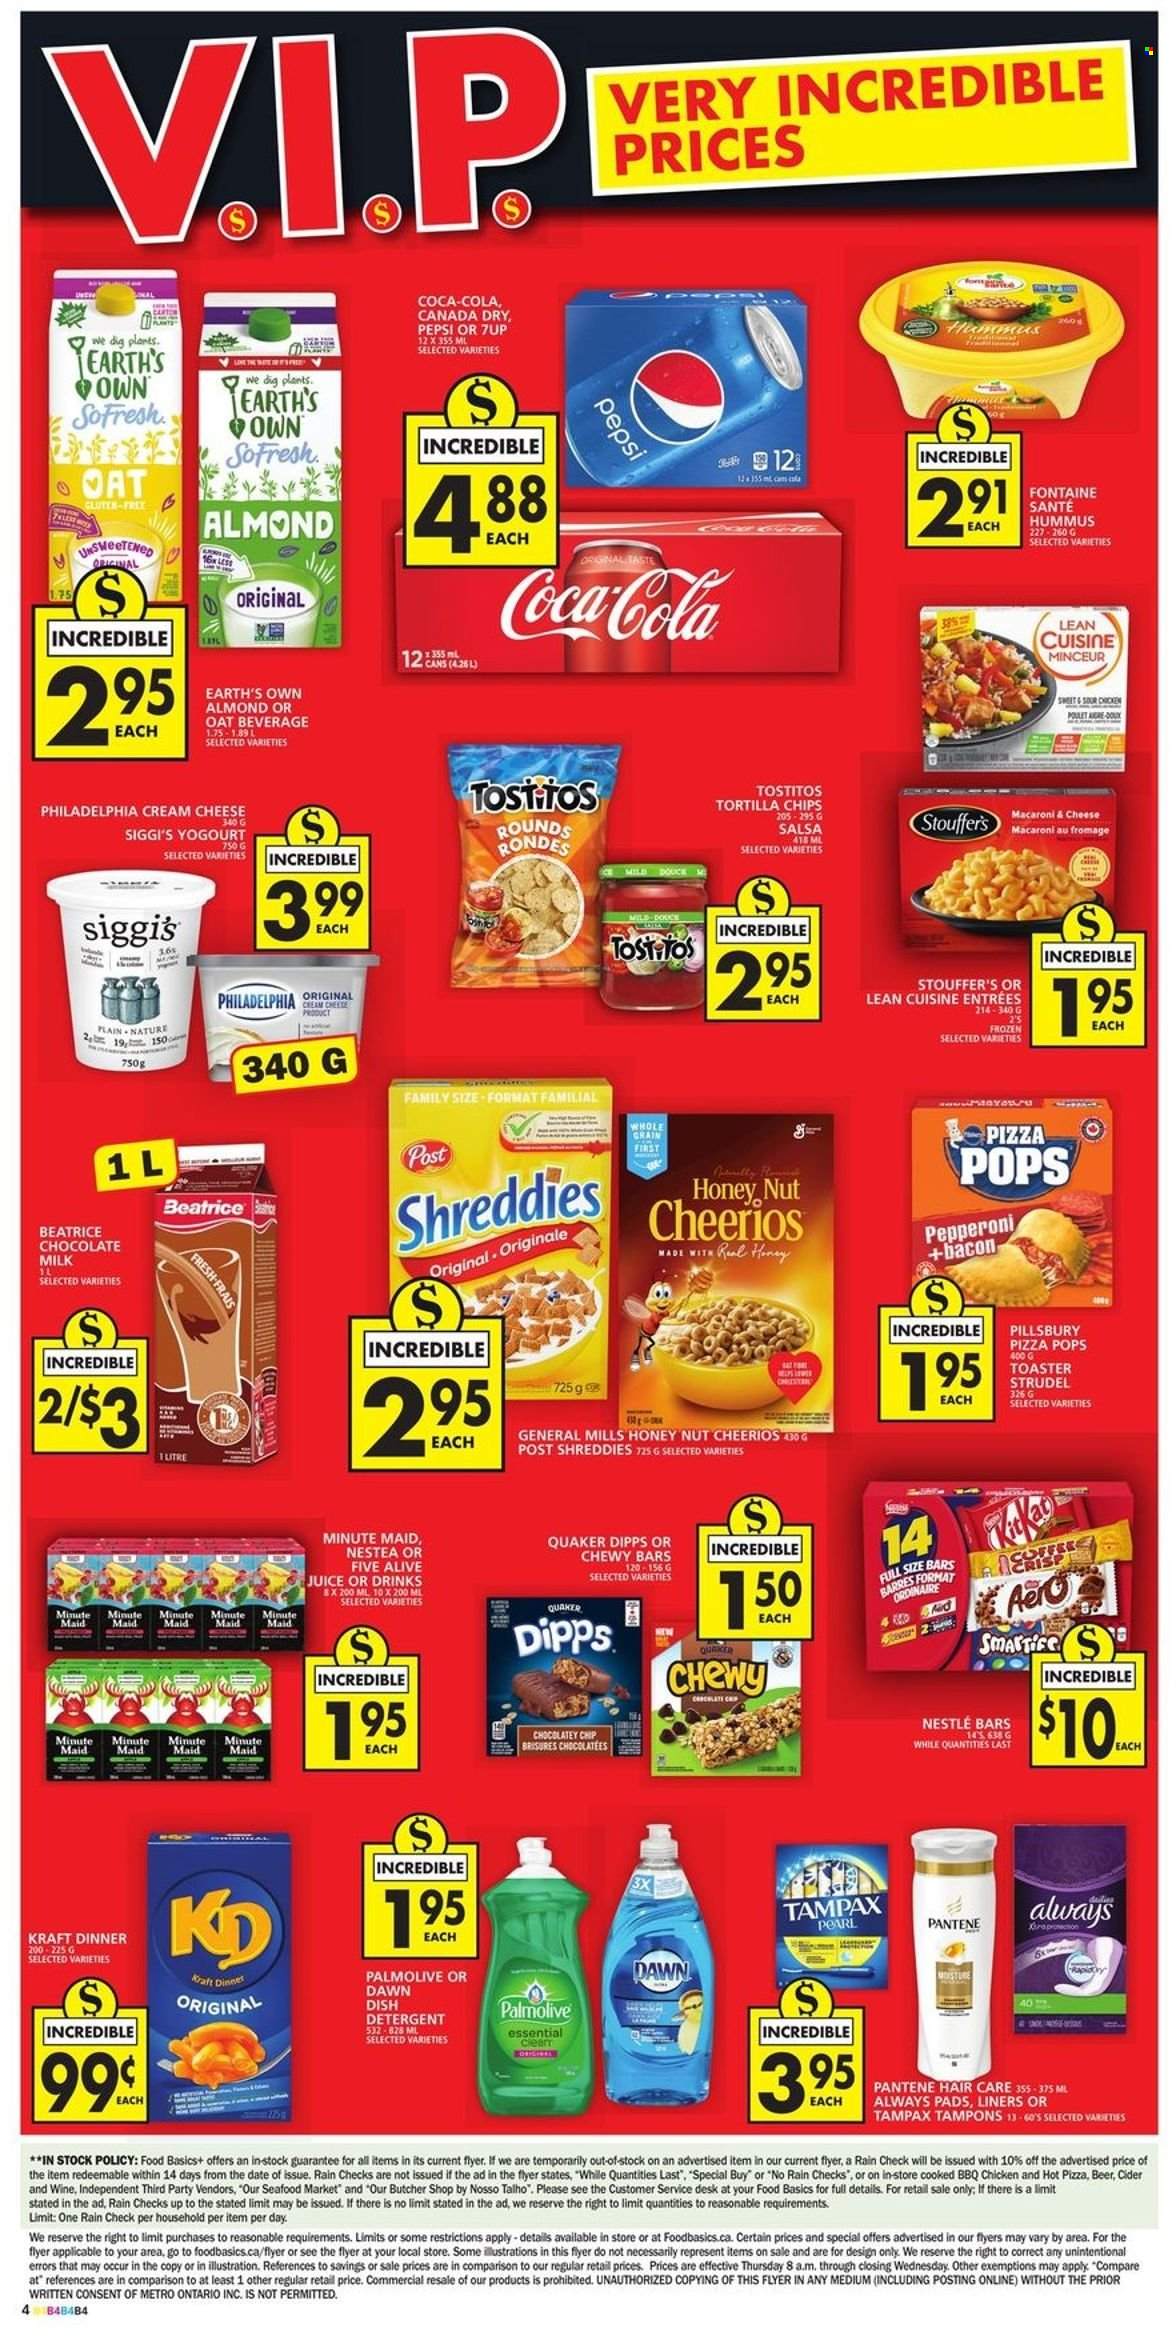 thumbnail - Food Basics Flyer - November 25, 2021 - December 01, 2021 - Sales products - strudel, seafood, macaroni & cheese, pizza, Pillsbury, Quaker, Lean Cuisine, Kraft®, bacon, hummus, cream cheese, milk, Stouffer's, milk chocolate, chocolate, tortilla chips, Tostitos, Cheerios, salsa, Canada Dry, Coca-Cola, Pepsi, juice, 7UP, fruit punch, wine, cider, beer, Palmolive, Always pads, tampons, Nestlé, detergent, Tampax, Philadelphia, Pantene. Page 4.